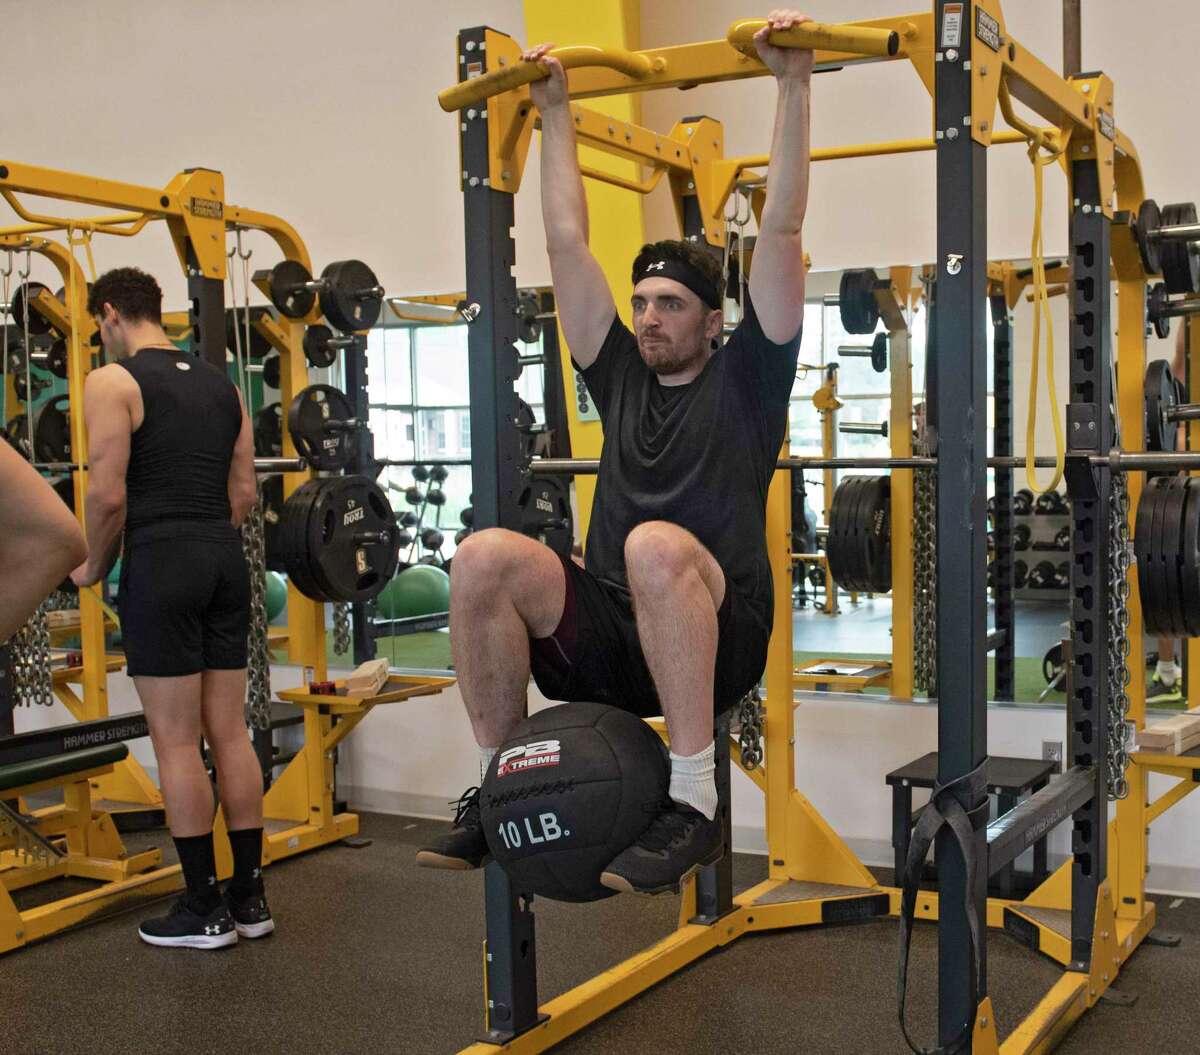 Siena basketball player Andrew Platek is seen using the strength and conditioning suite with his team at the Marcelle Athletic Complex at Siena College on Thursday, June 23, 2022 in Loudonville, N.Y.